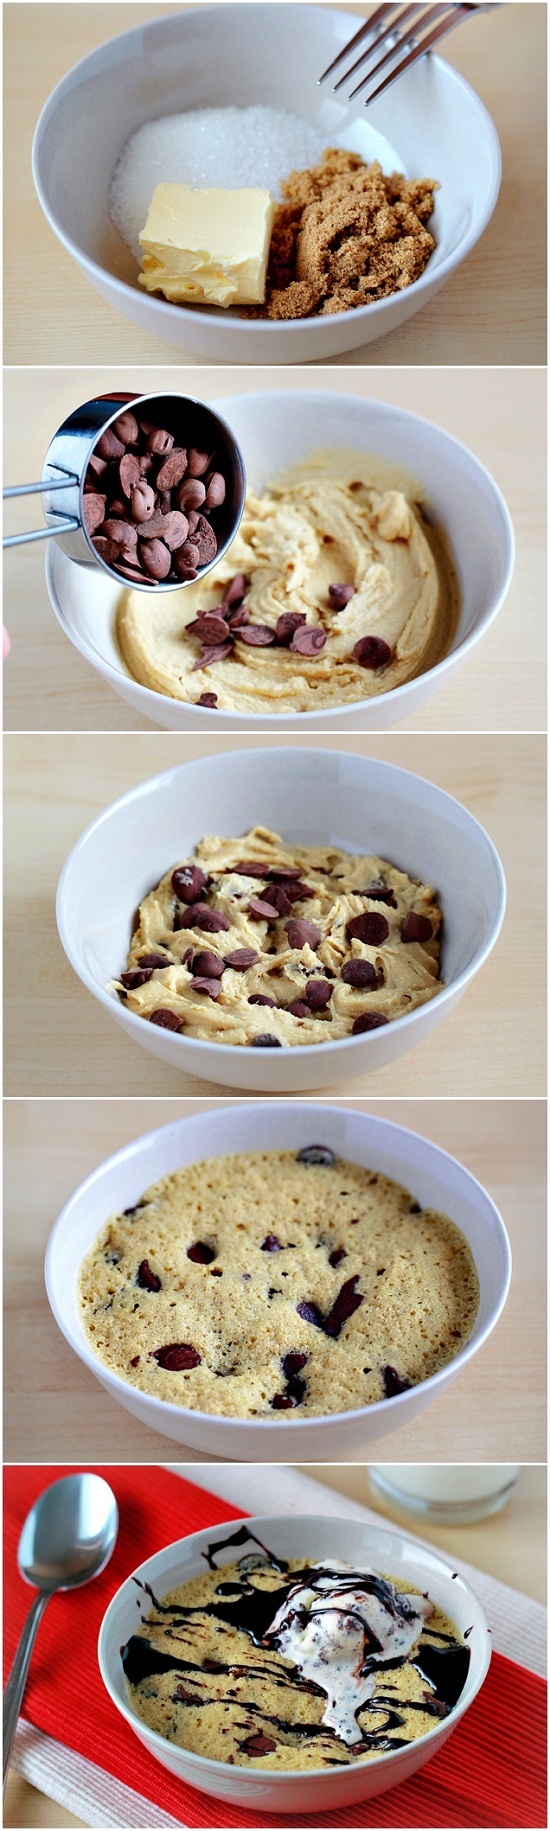 2-Minute Chocolate Chip Cookie For One